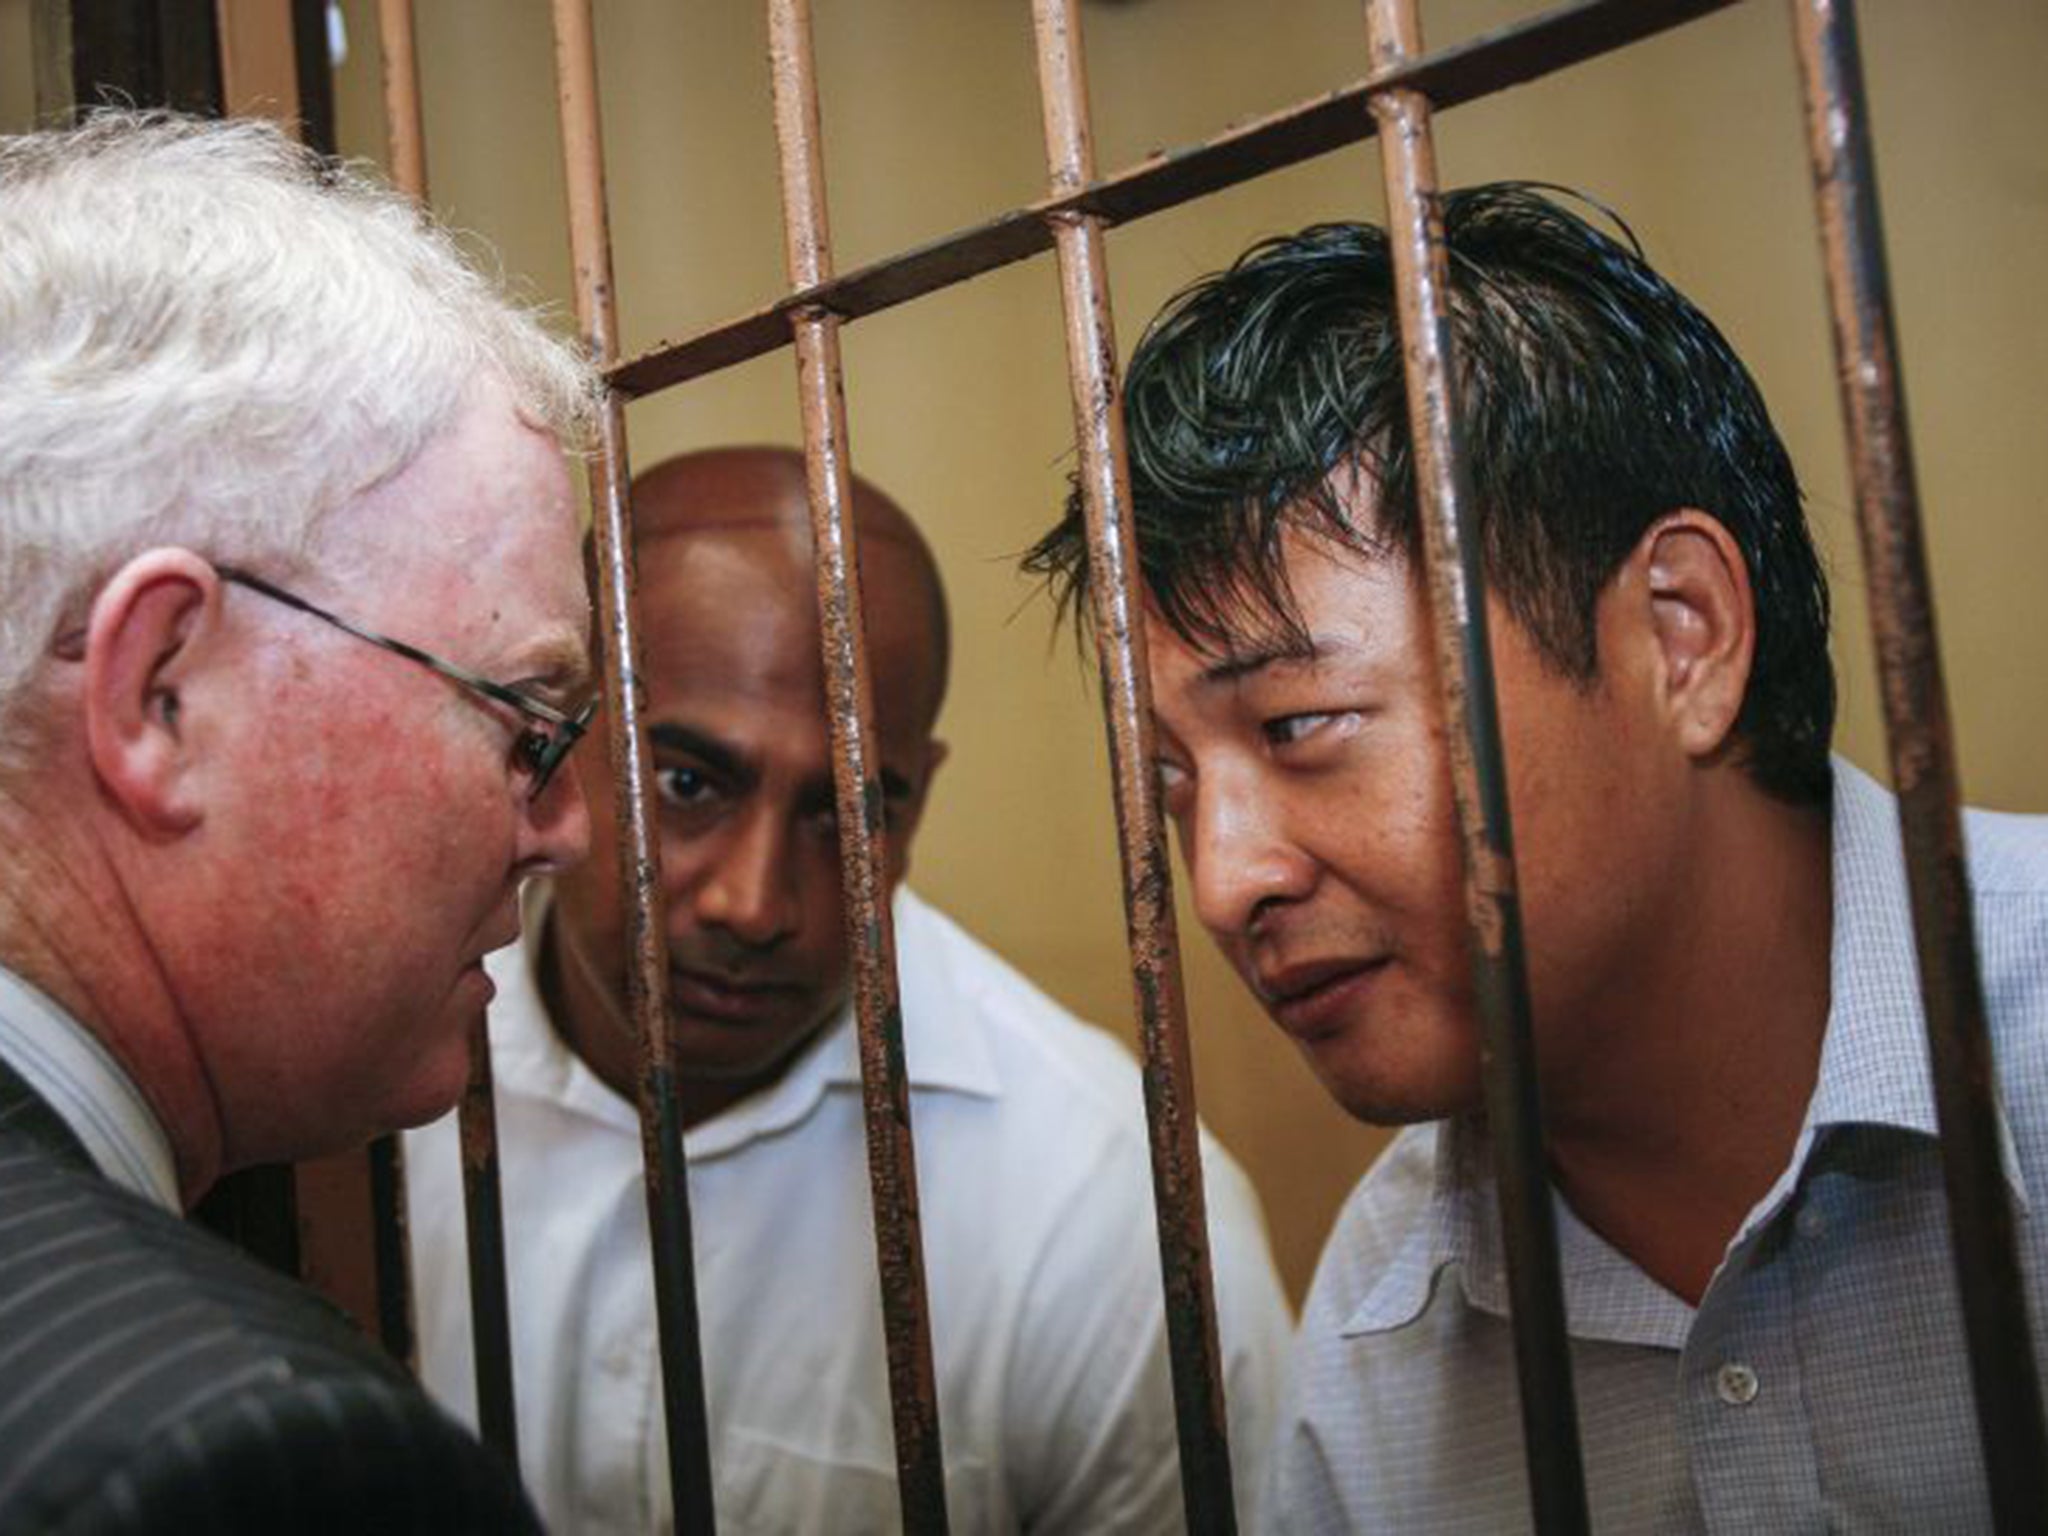 Bali Nine convict to refuse blindfold when he faces firing squad in  Indonesia, The Independent